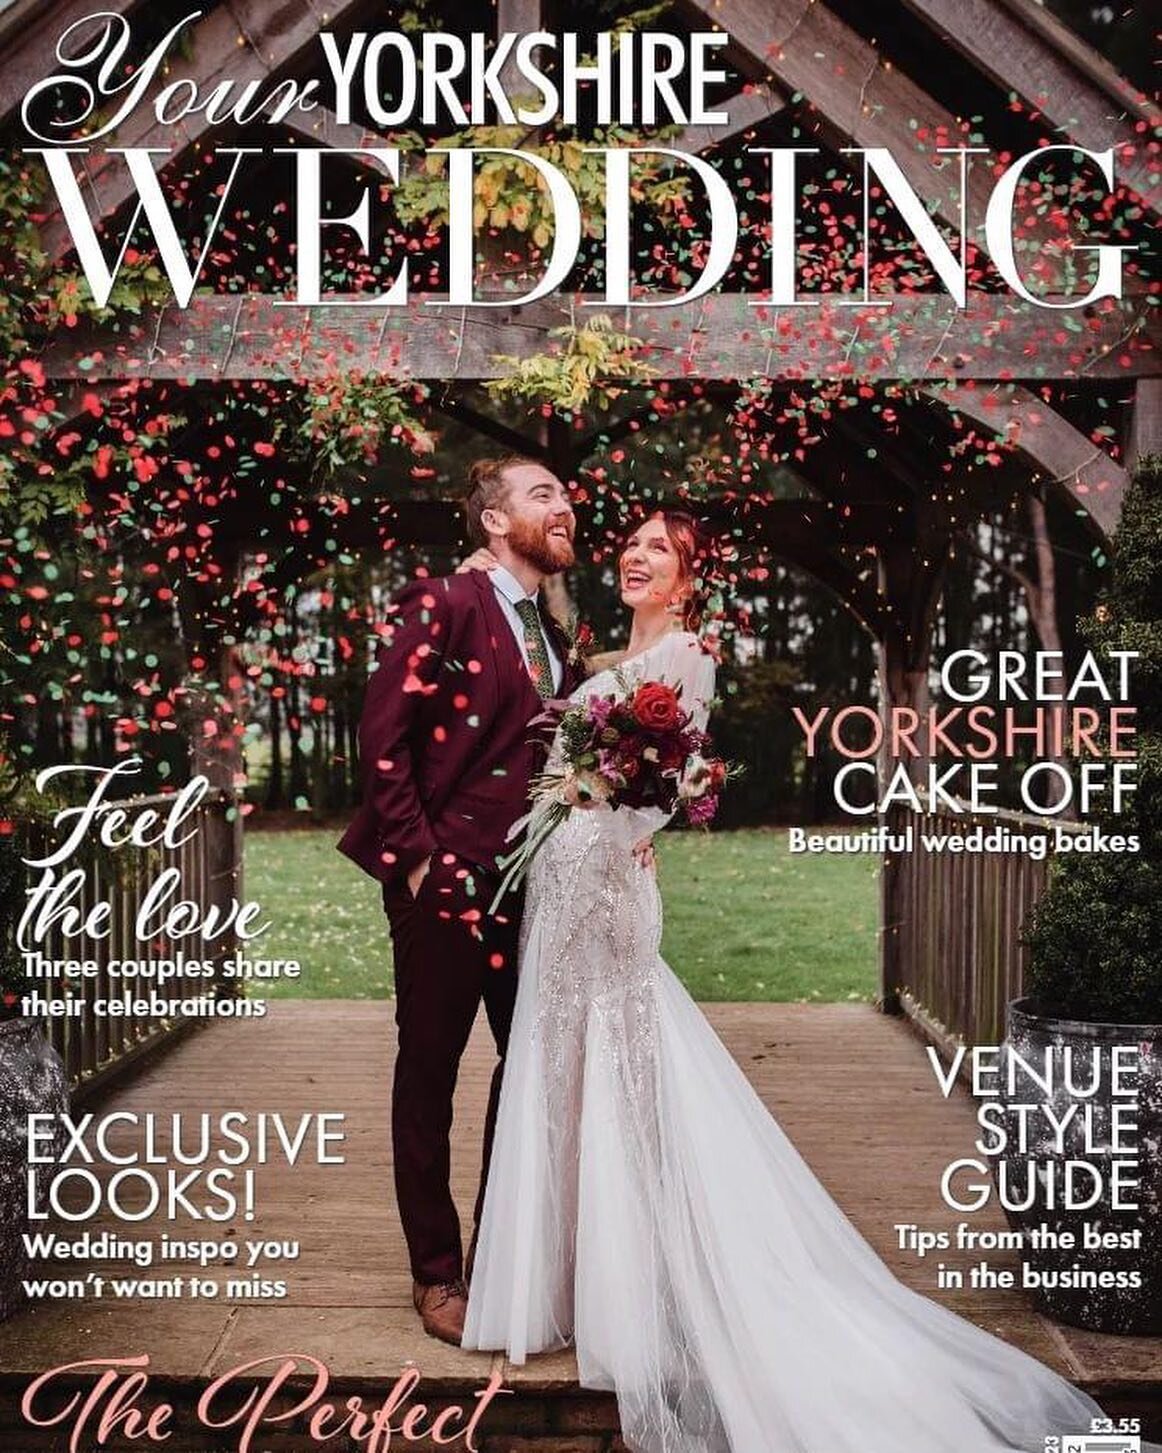 COVER STORY

Oh casually strolling into Wednesday on the cover of Your Yorkshire &mdash; @countryweddingmagazines

An EPIC team created this stunning shoot. So exciting to see it in print! 🎉🎉🎉

Concept and photography @hannahbrookephoto
Concept an